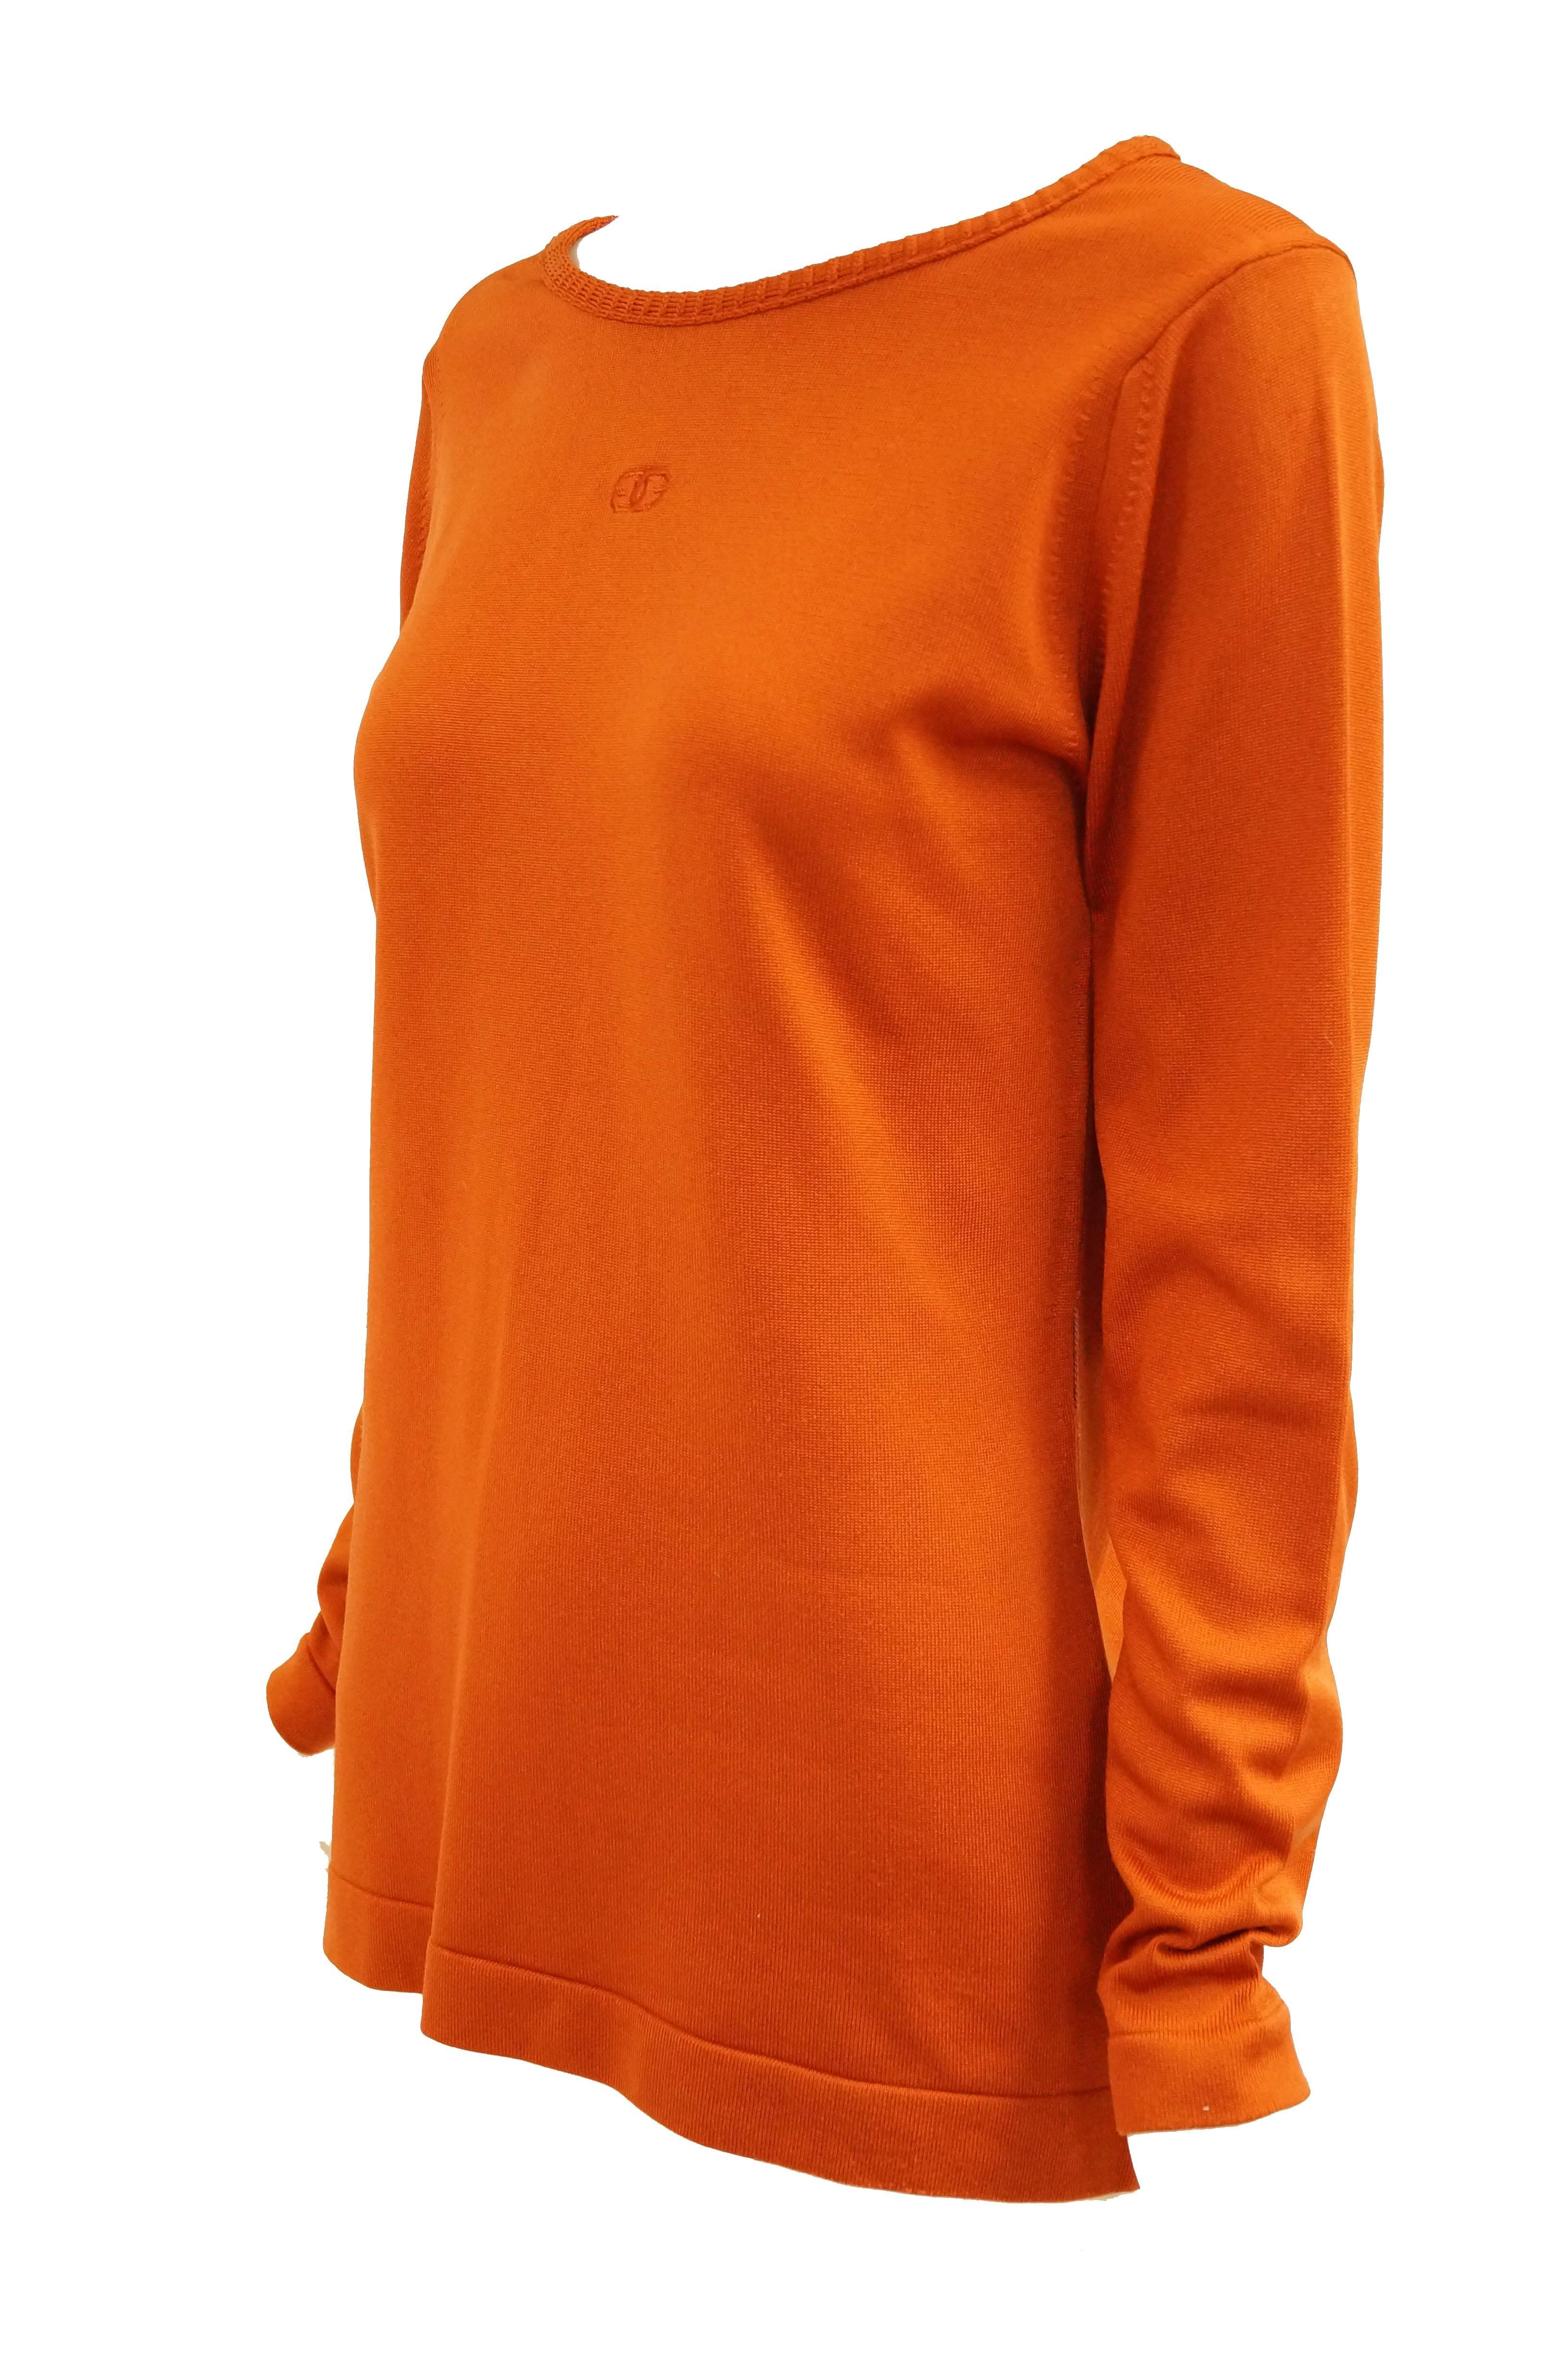 Givenchy Sport Tangerine Orange Pullover Sweater, 1970s  In Excellent Condition In Houston, TX